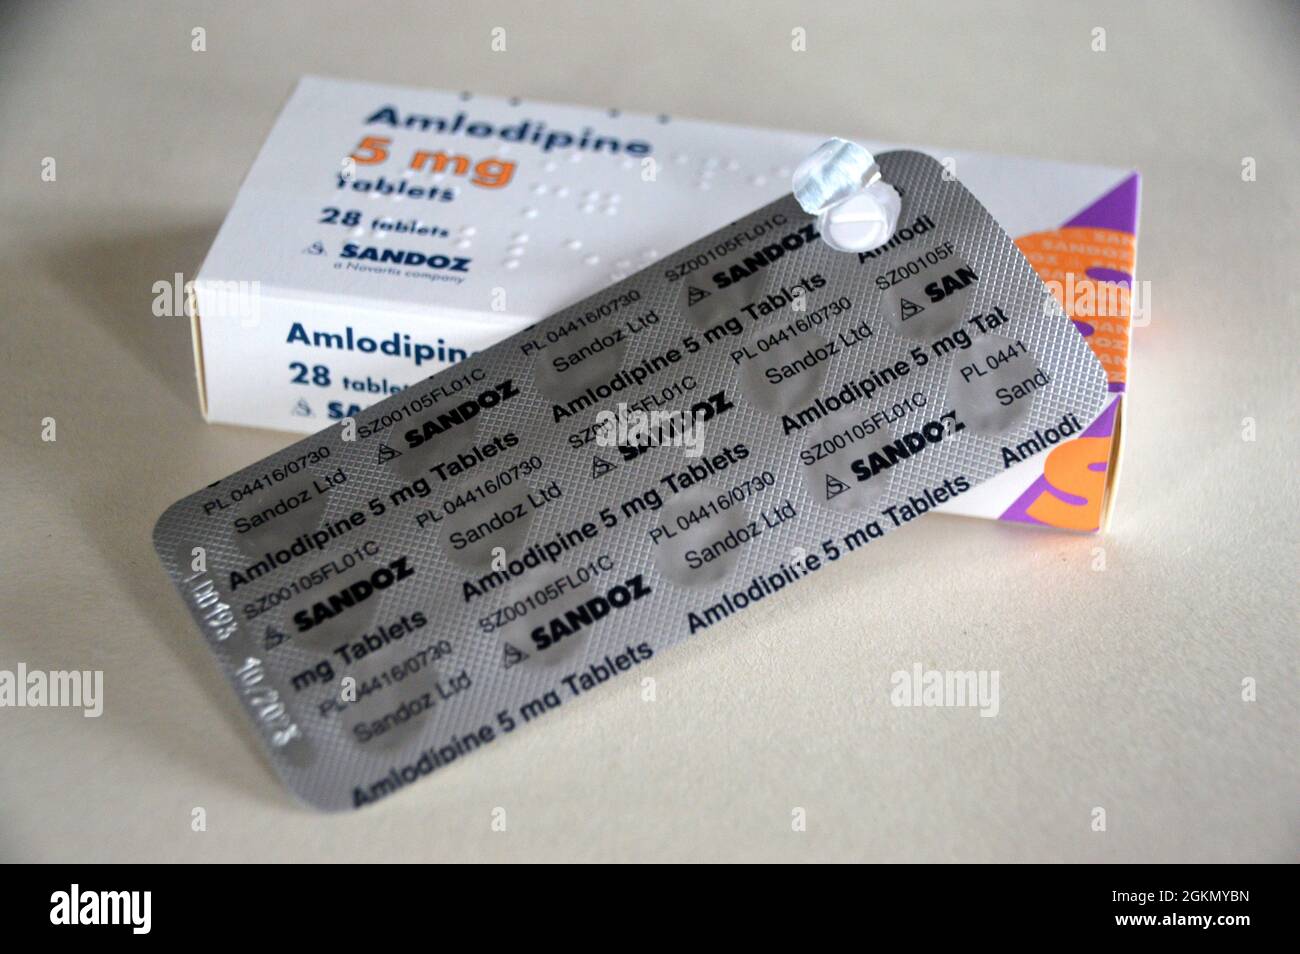 Amlodipine Tablets High Resolution Stock Photography and Images - Alamy